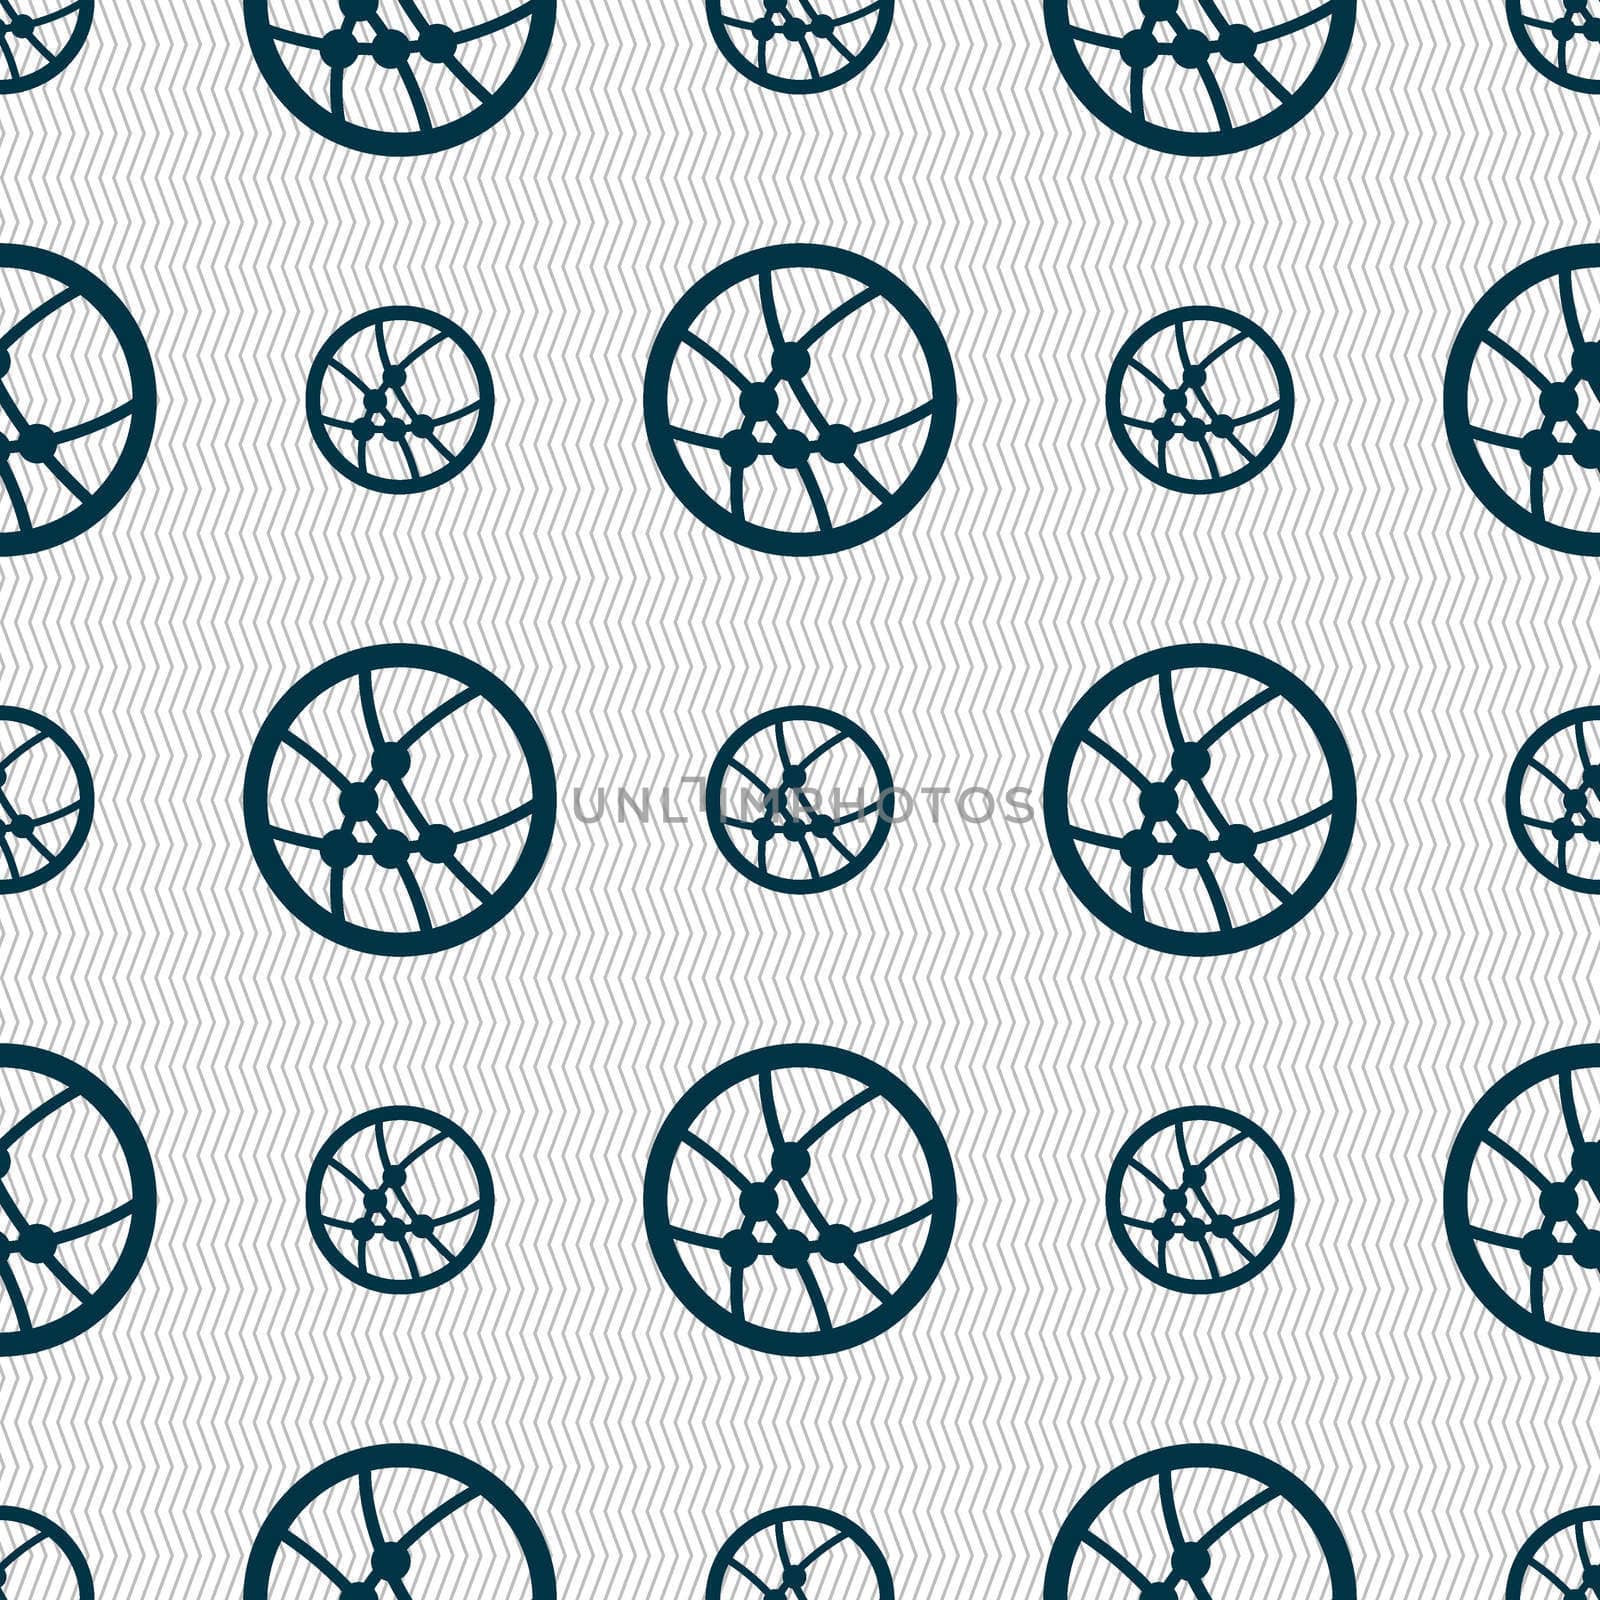 Basketball icon sign. Seamless abstract background with geometric shapes. illustration